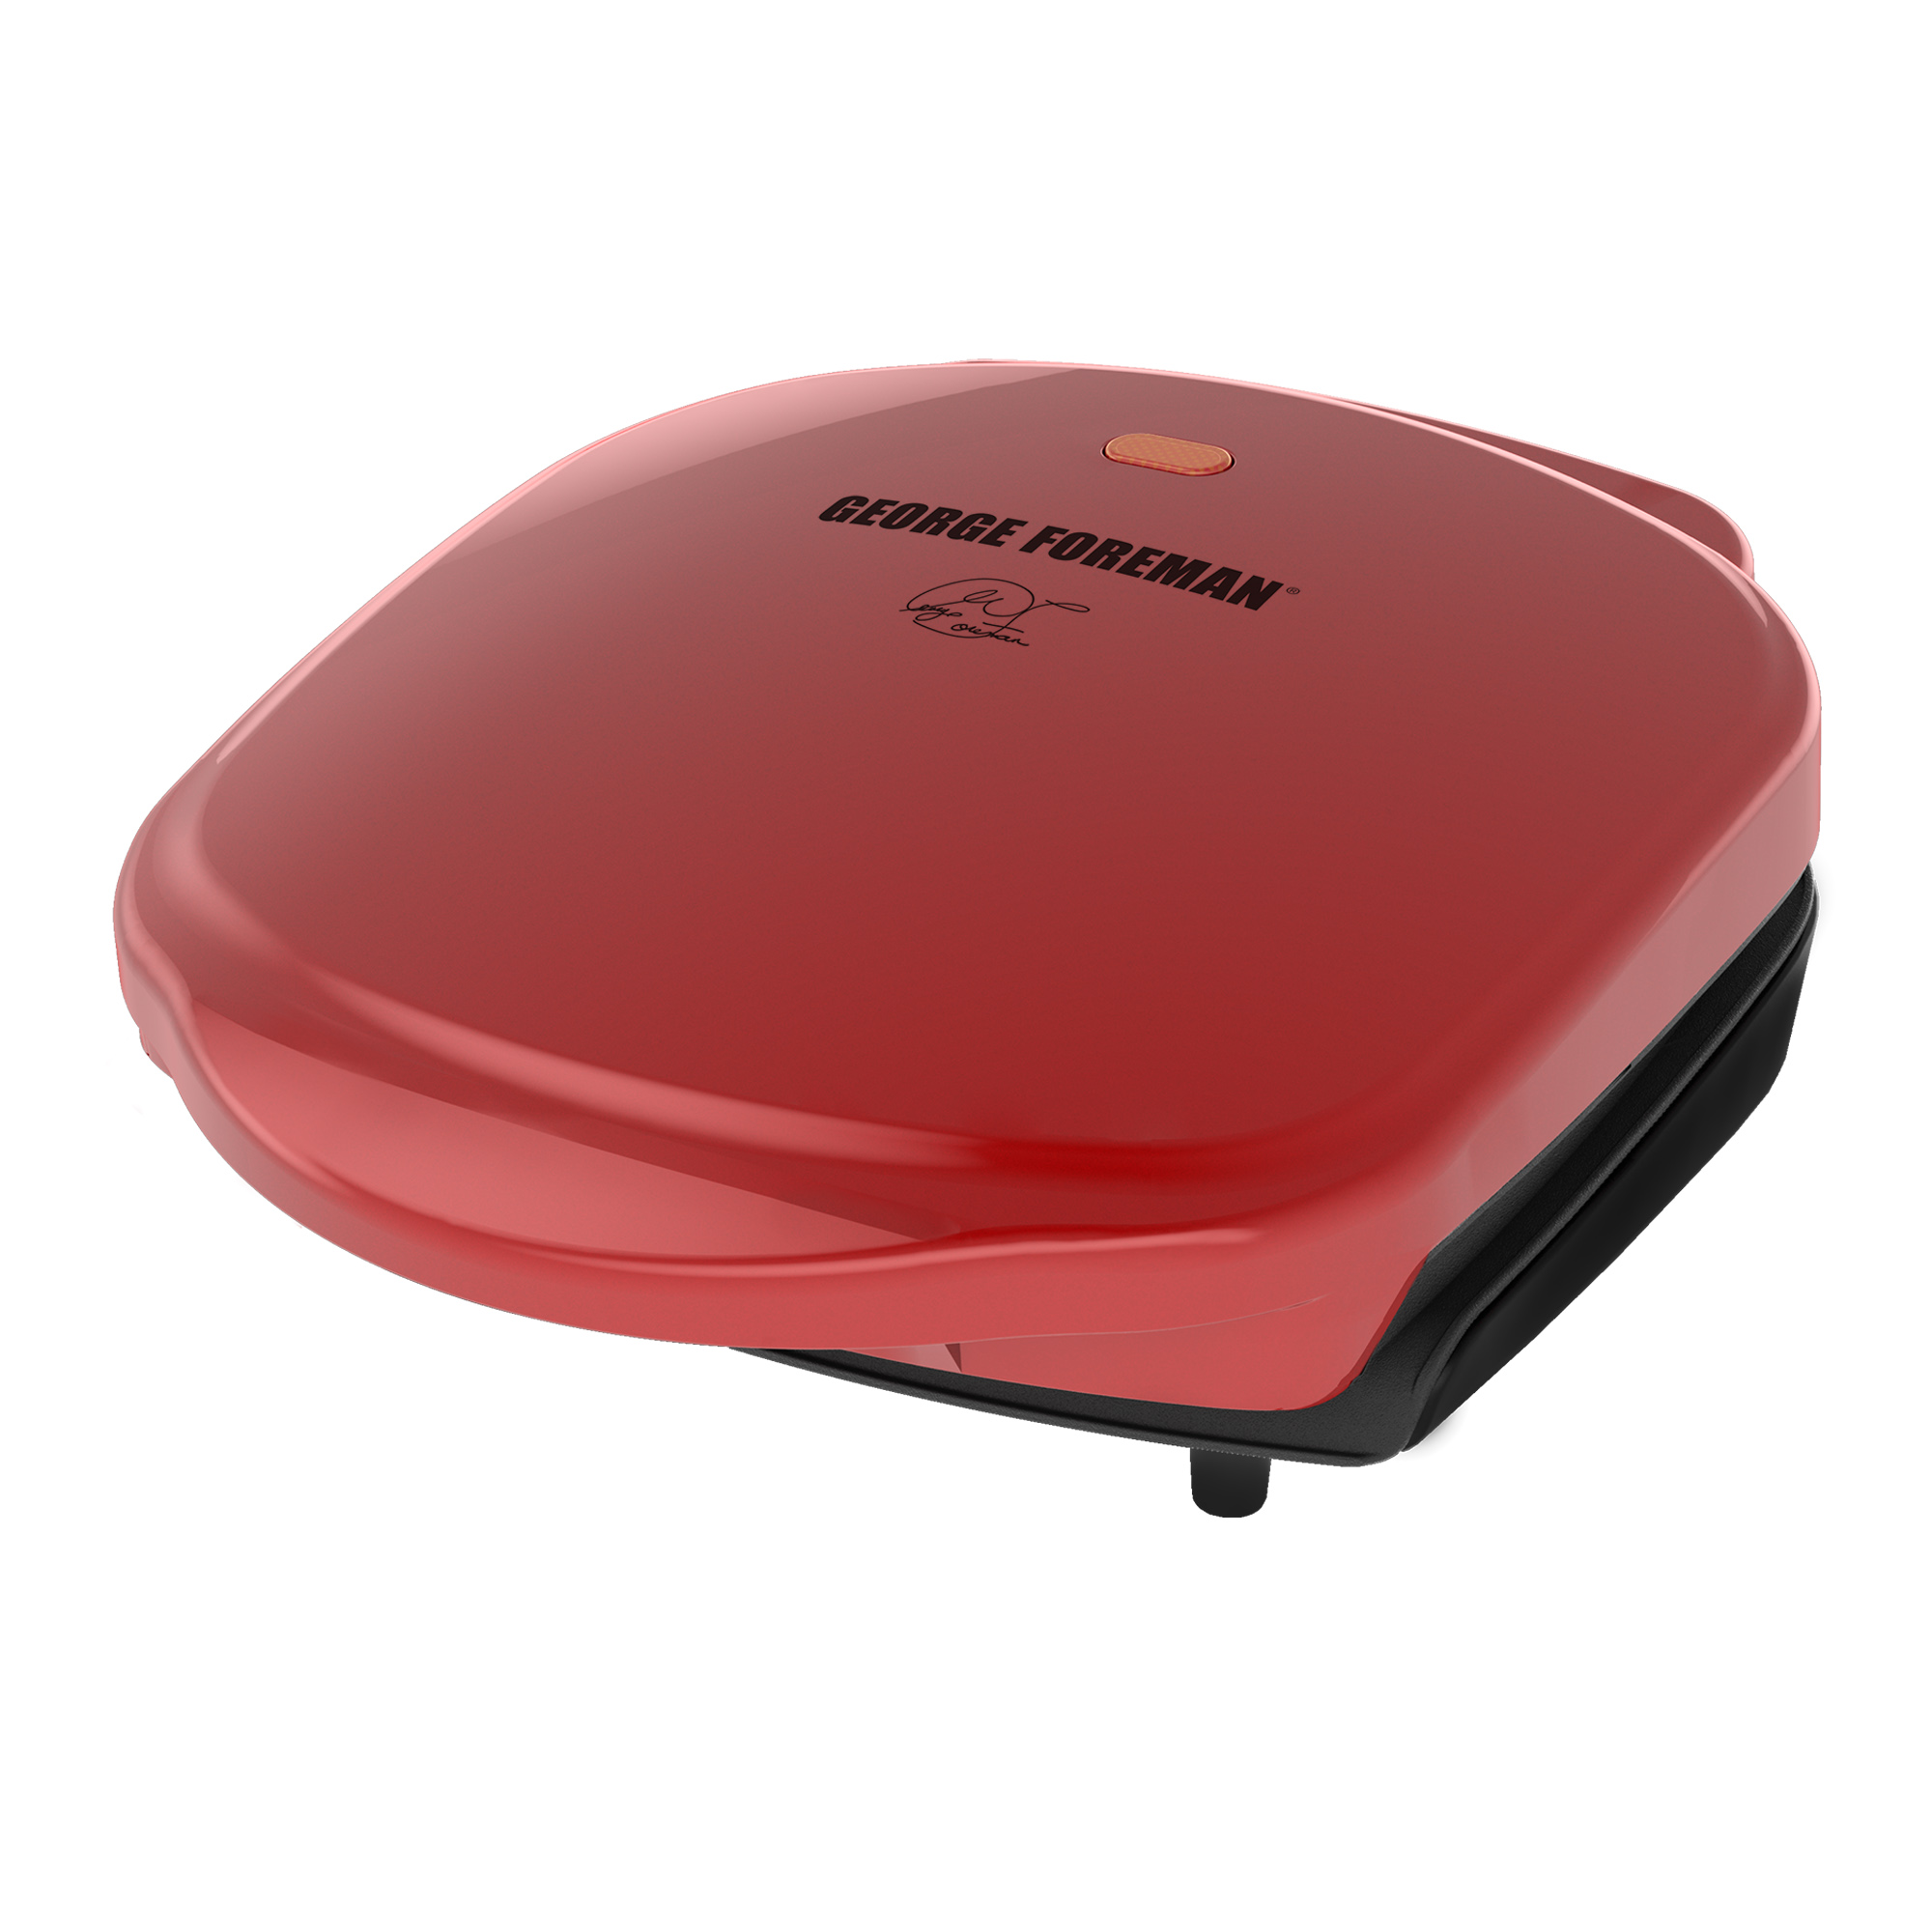 George Foreman 2-Serving Classic Plate Electric Indoor Grill and Panini Press, Red, GR10RM - image 1 of 11